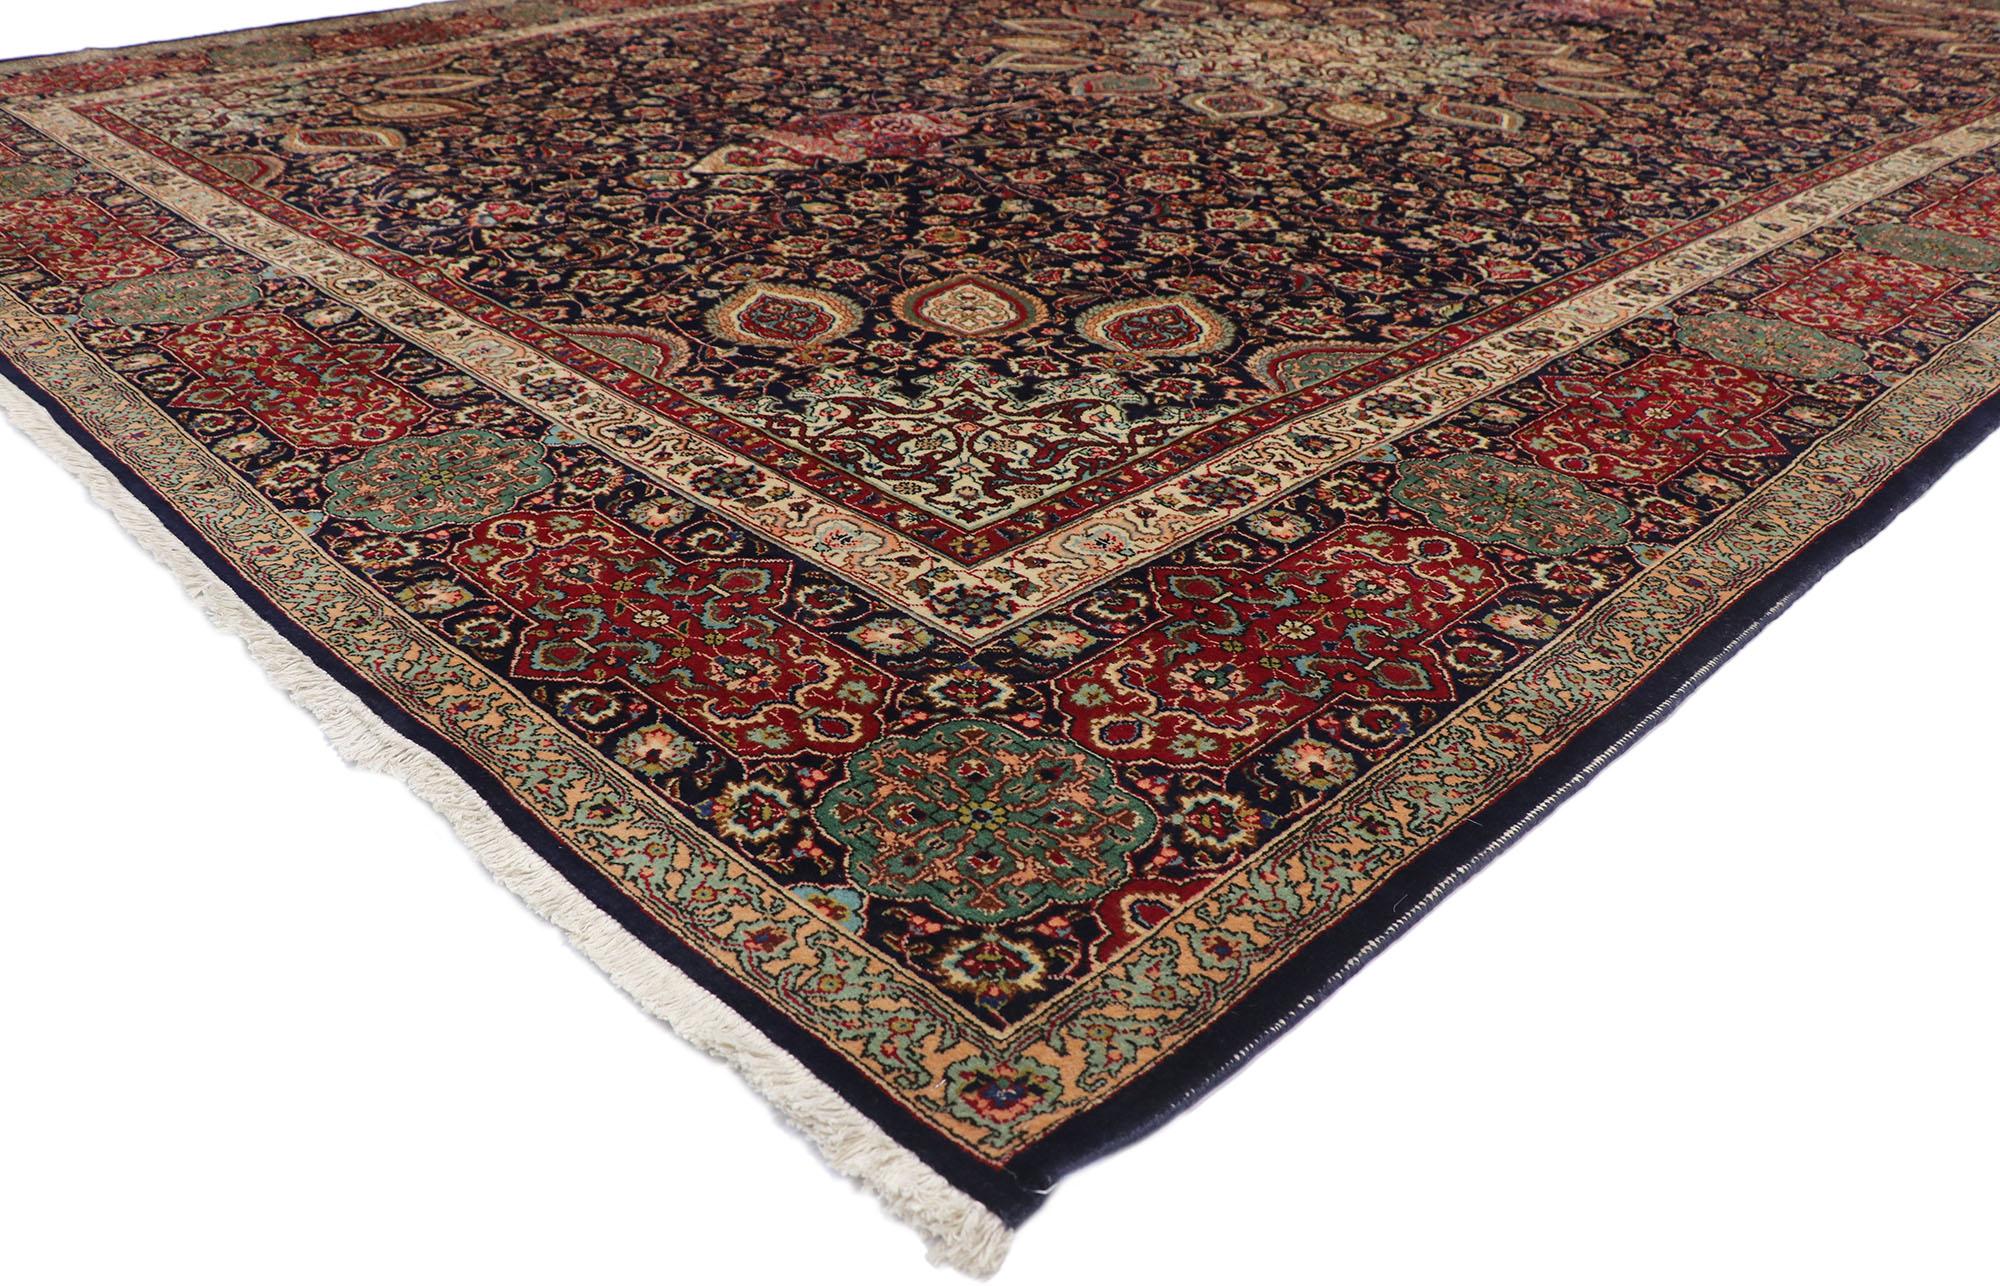 75664, vintage Persian Tabriz Palace size rug with The Ardabil Carpet design. Inspired from the Ardabil carpet from the Safavid dynasty. This hand-knotted wool vintage Persian Tabriz palace size rug features a circular 16-point centre medallion